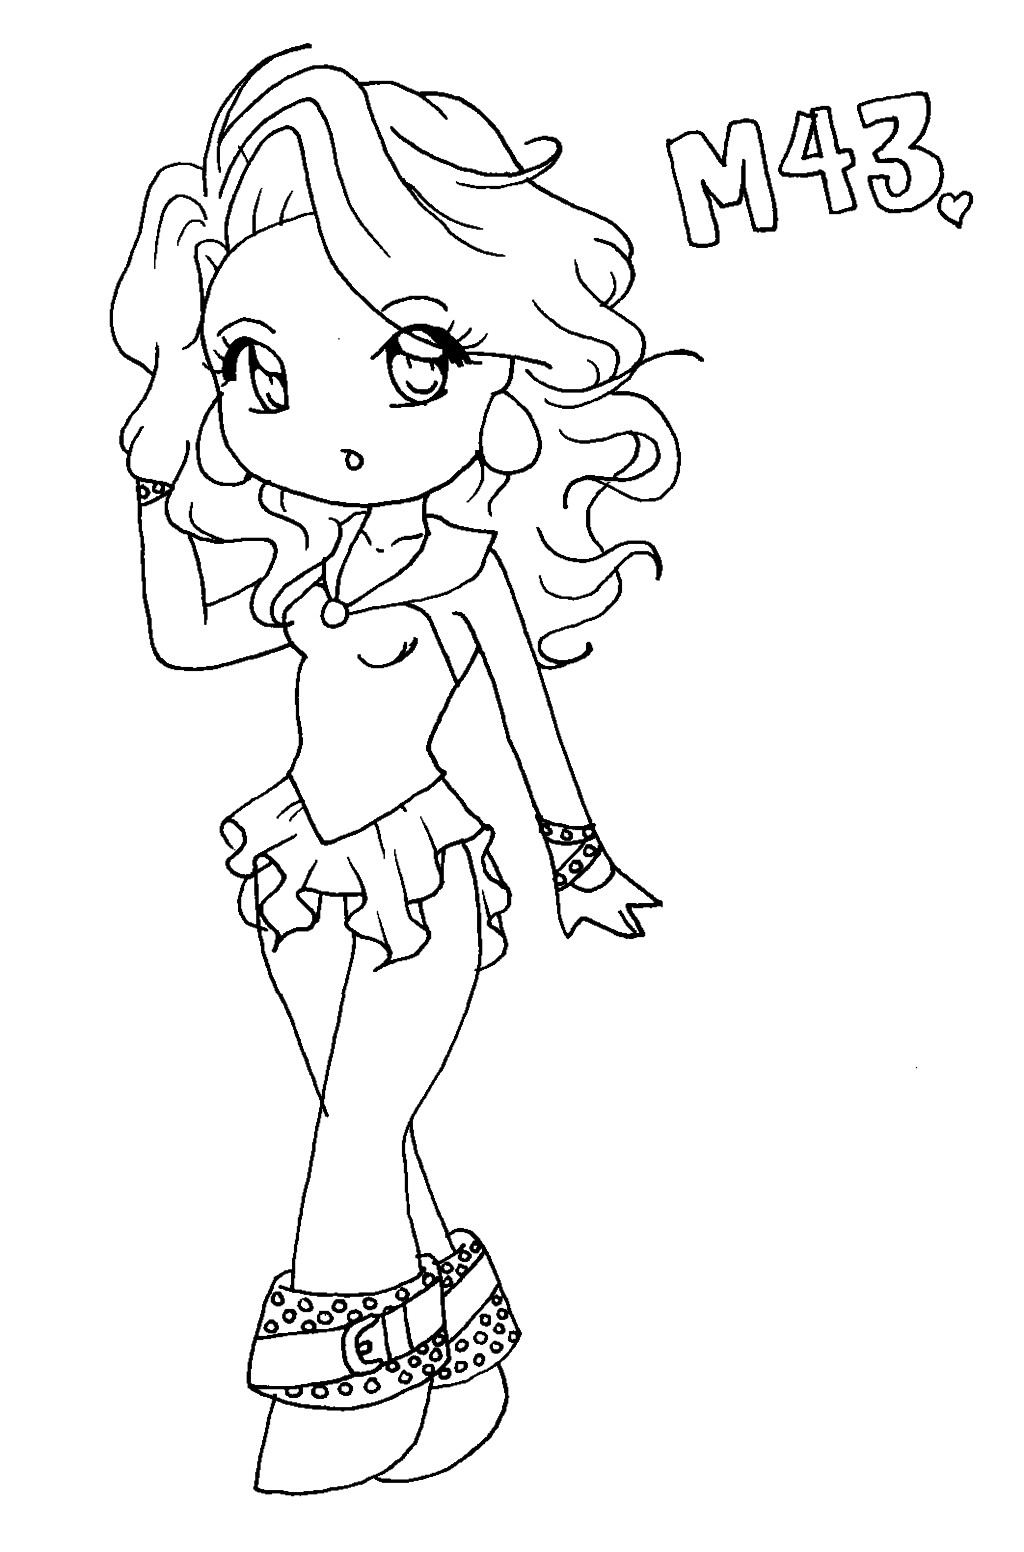 Chibi Coloring Pages With Three Girls
 Chibi Messier 43 Coloring Page by PandanaLove on DeviantArt